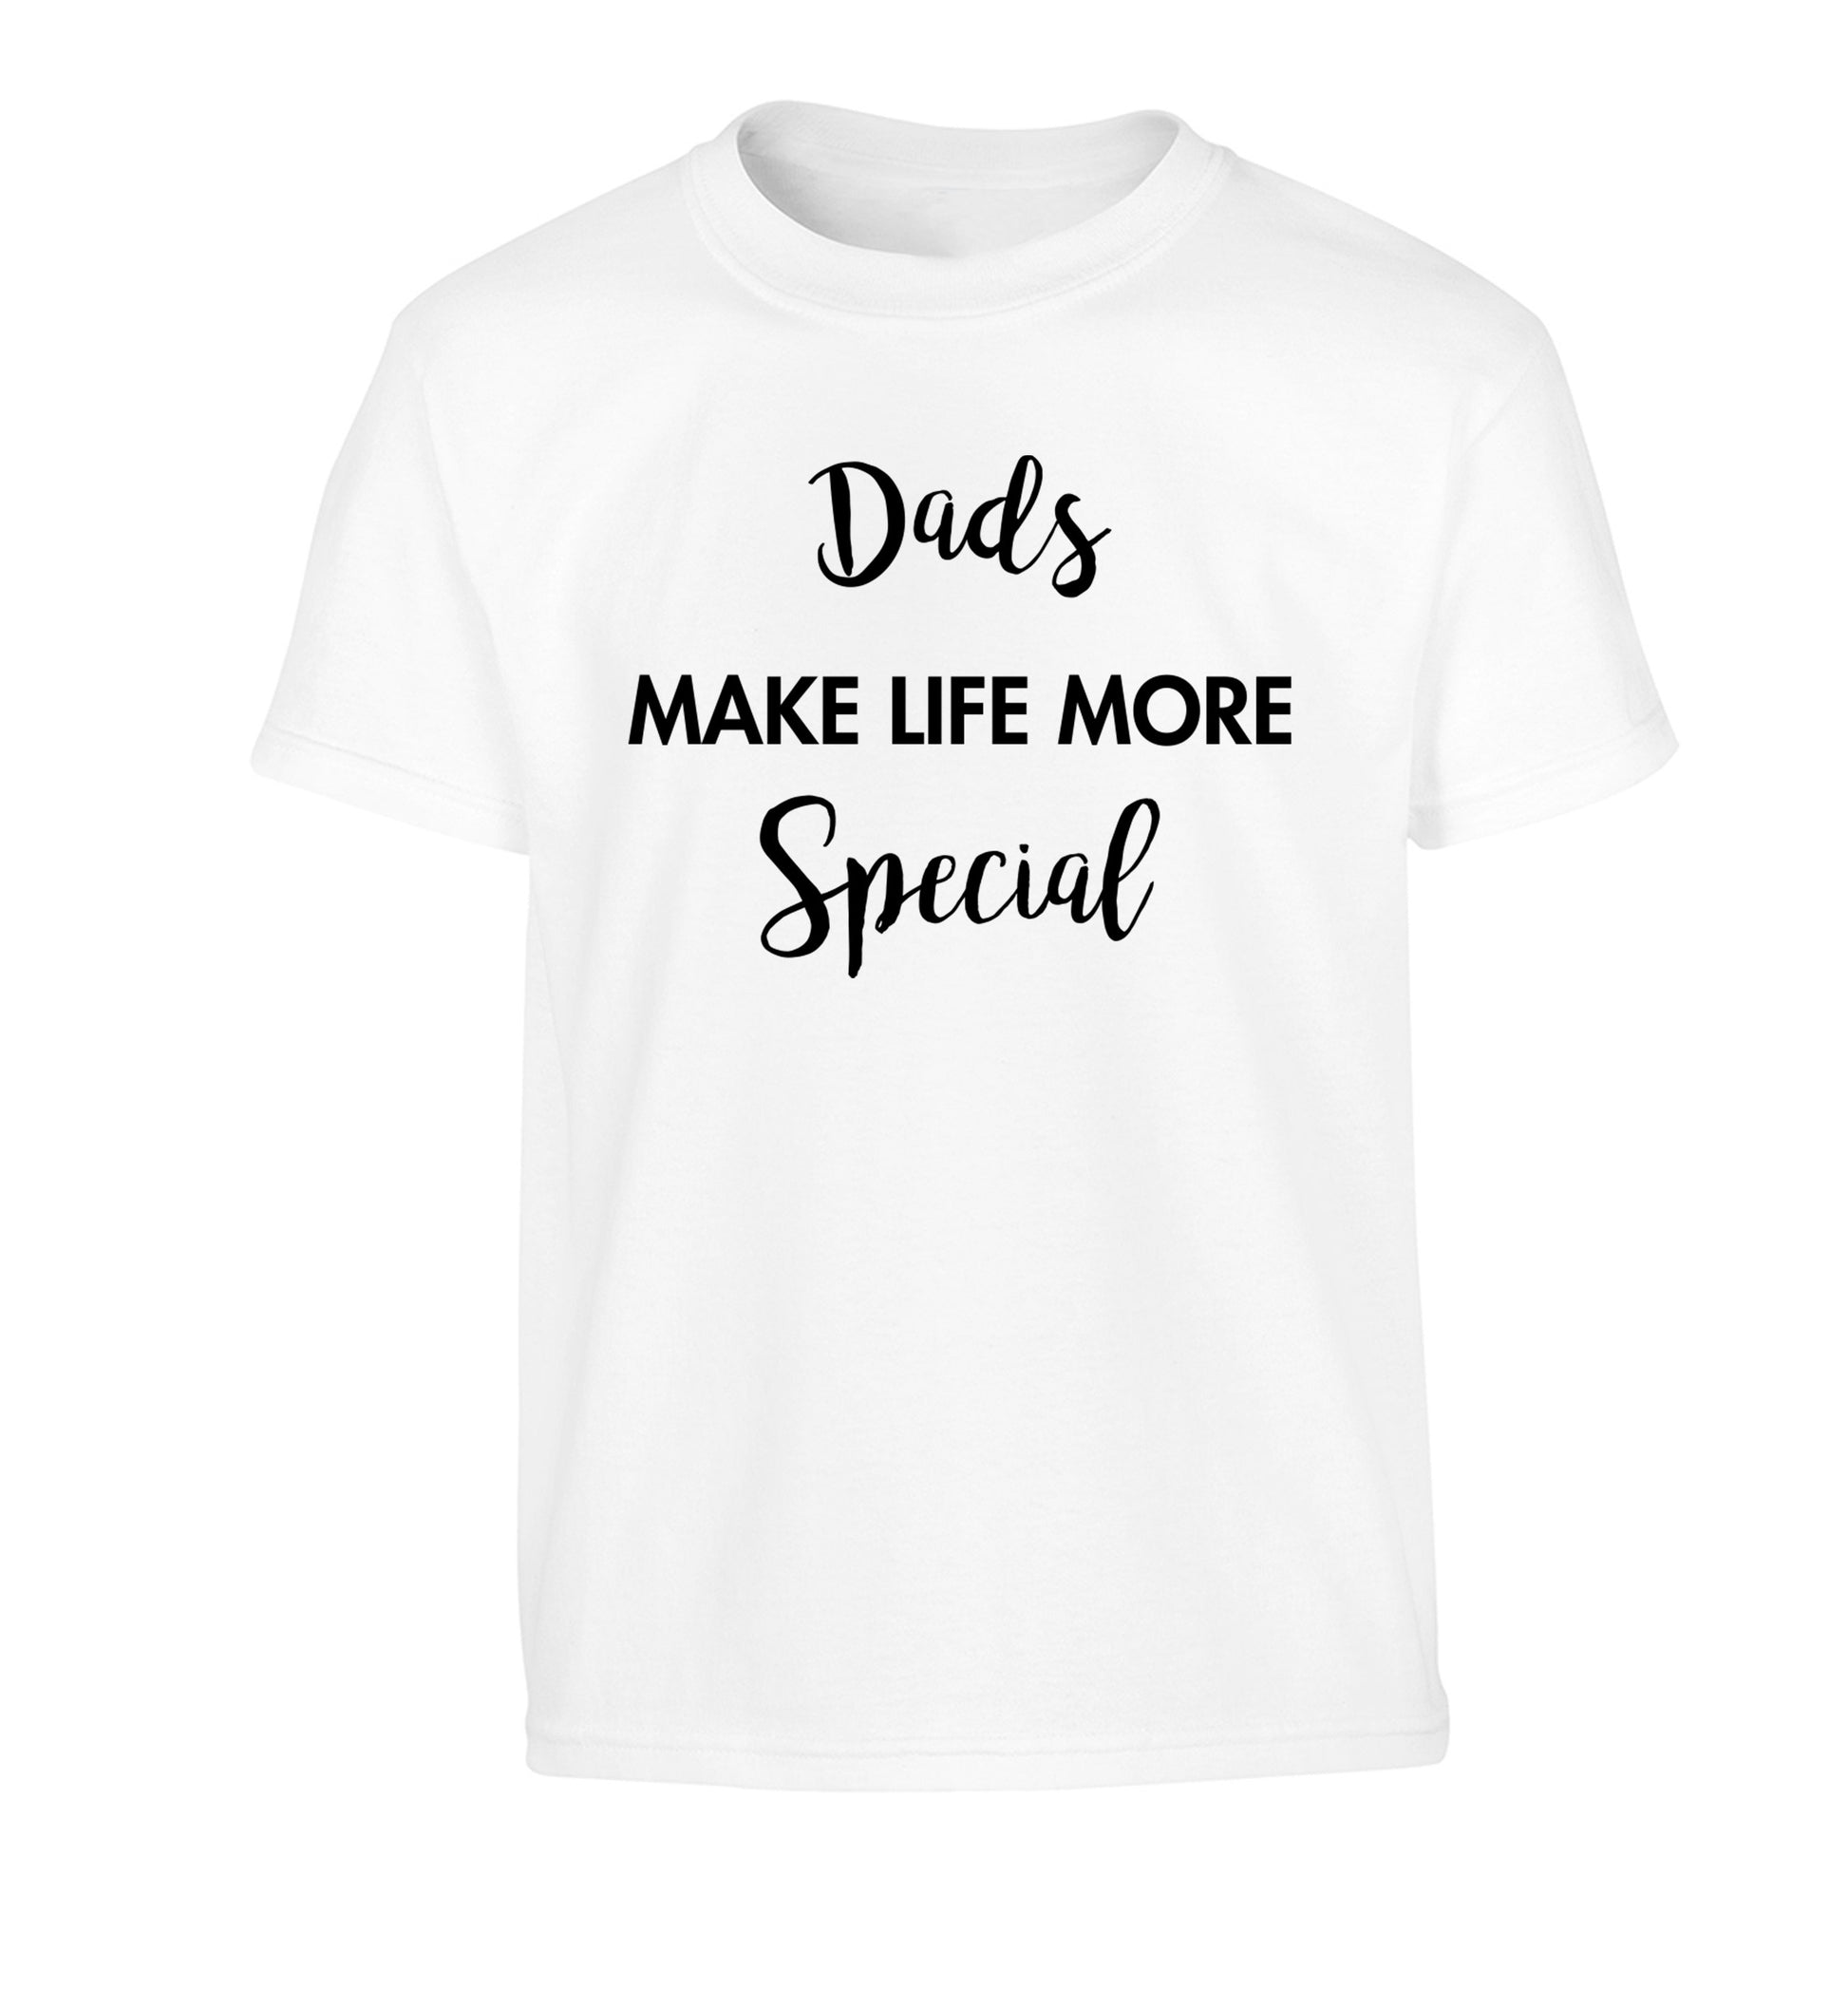 Dads make life more special Children's white Tshirt 12-14 Years